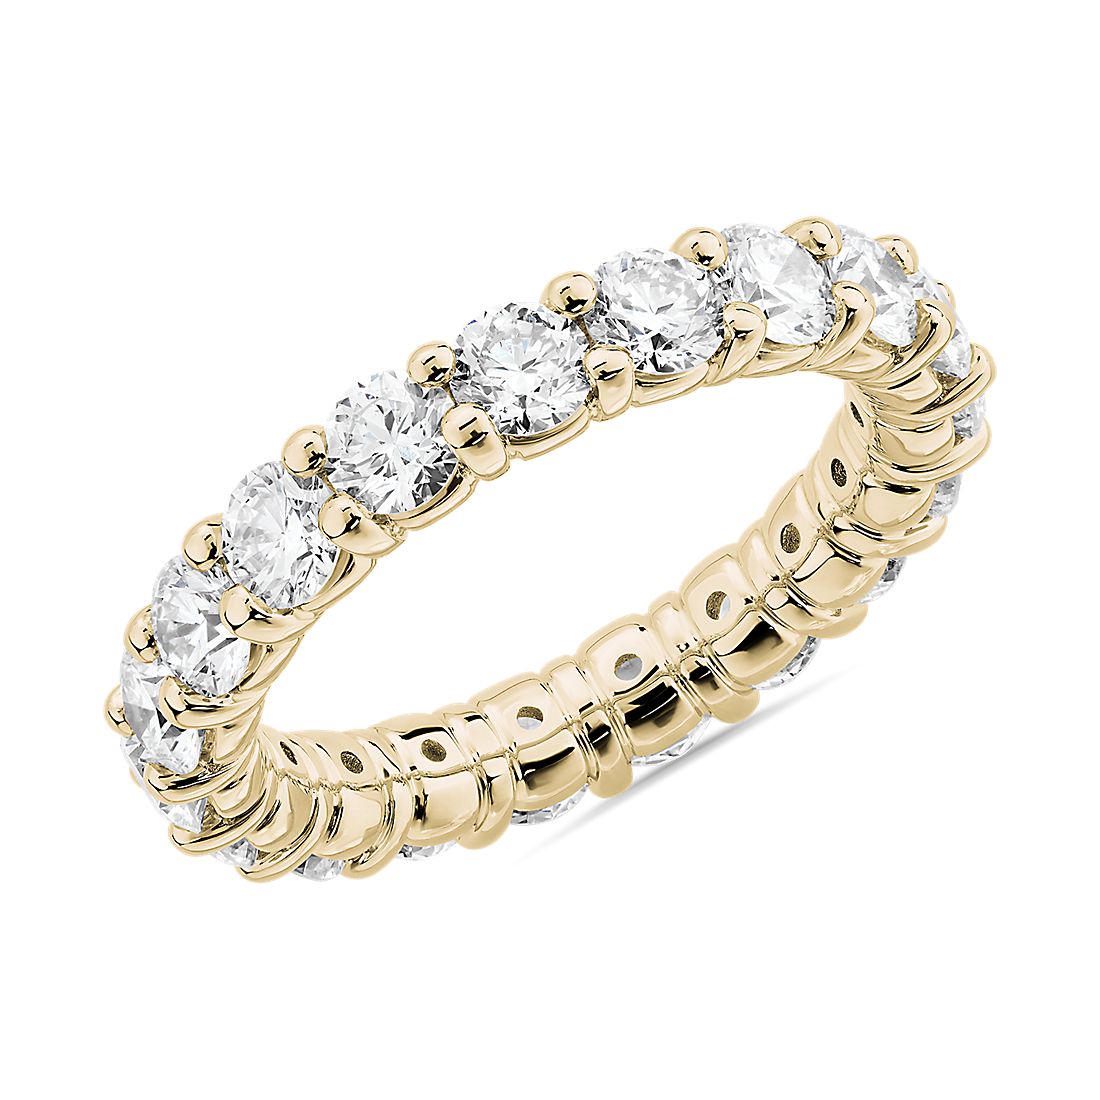 Comfort Fit Round Brilliant Diamond Eternity Ring in 18k Yellow Gold (2.81 ct. tw.)